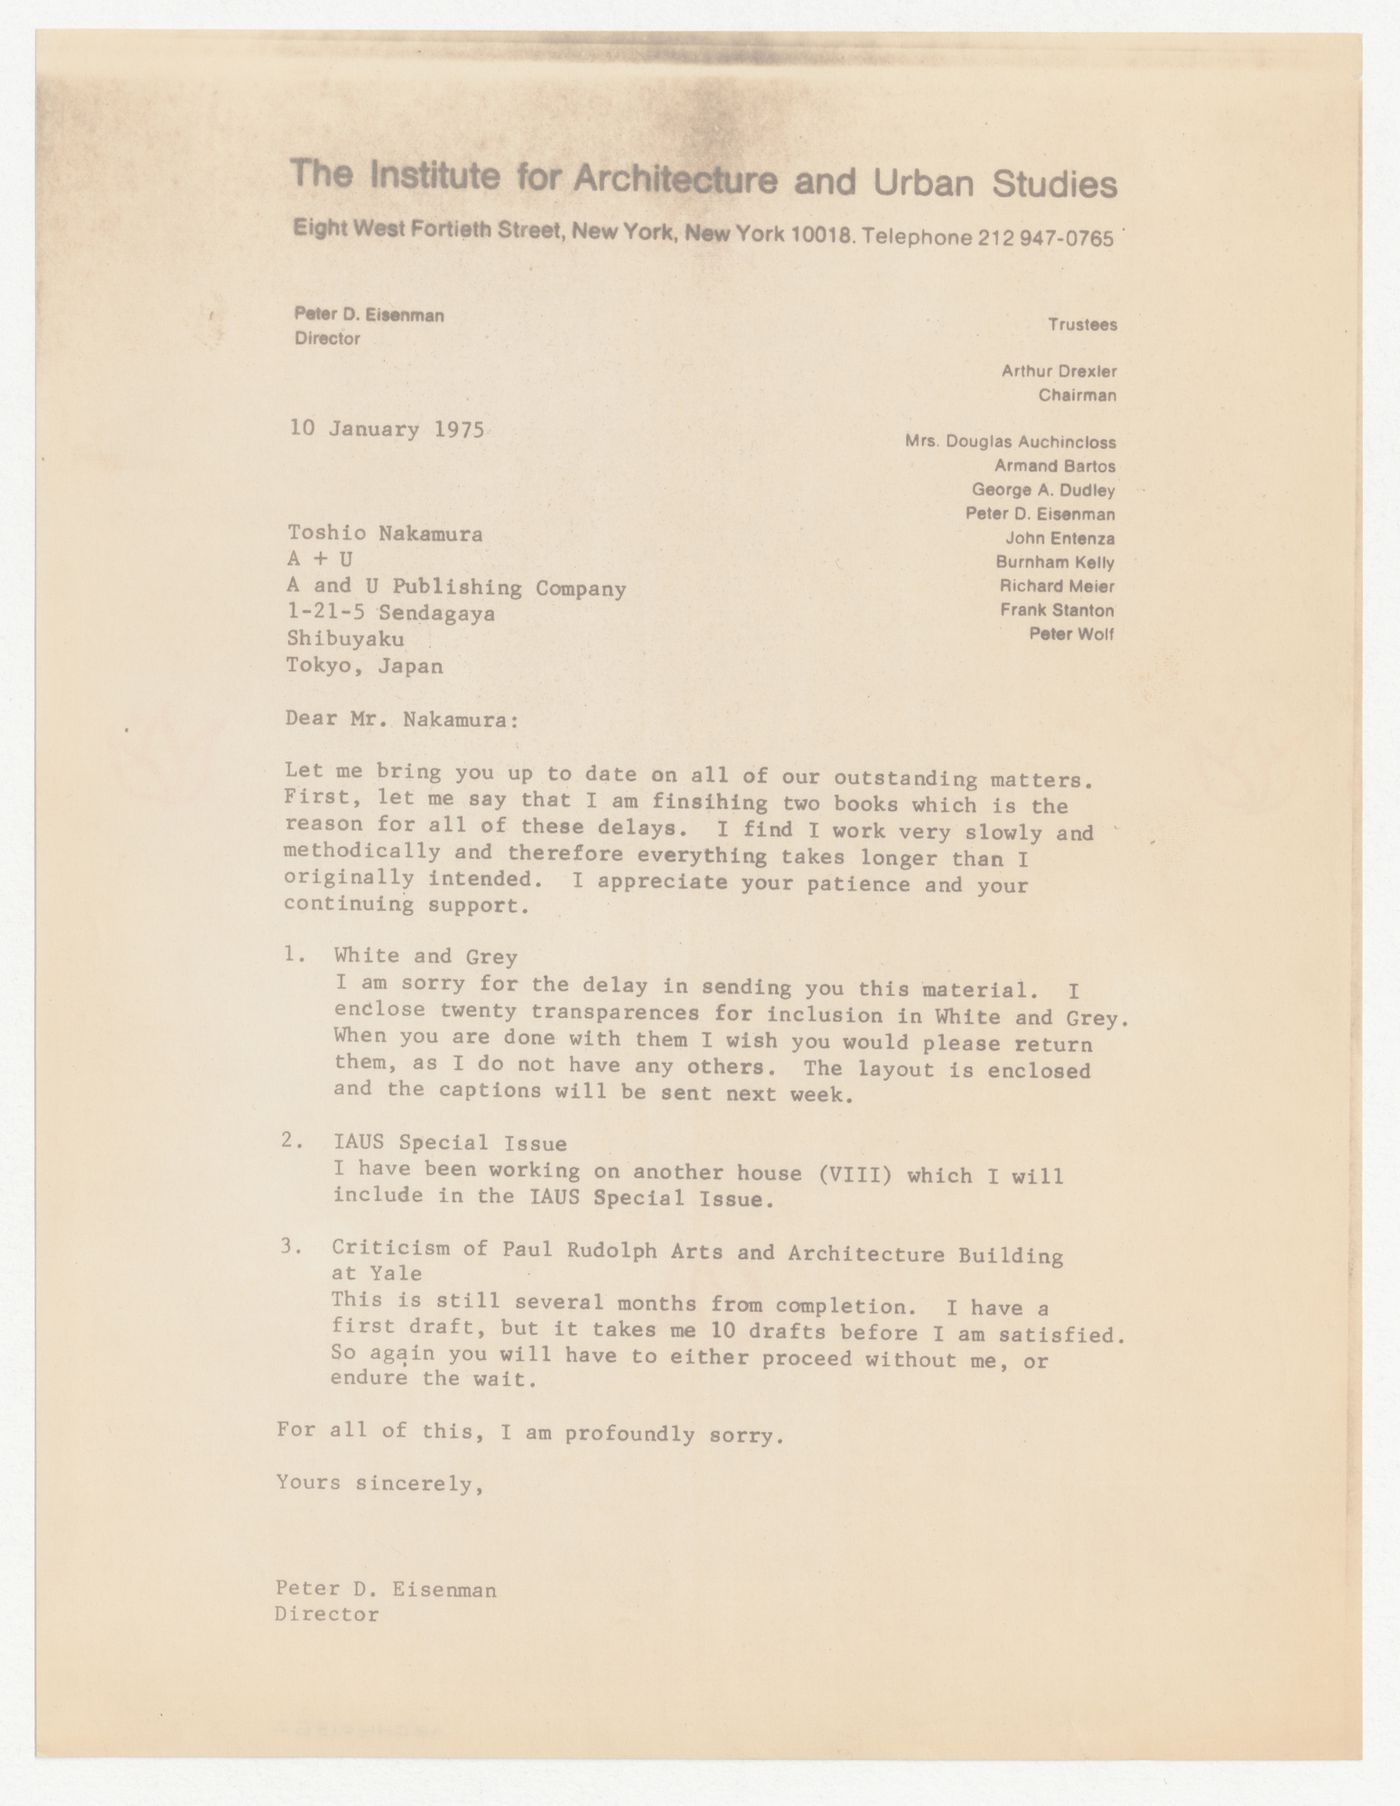 Letter from Peter D. Eisenman to Toshio Nakamura about delayed projects